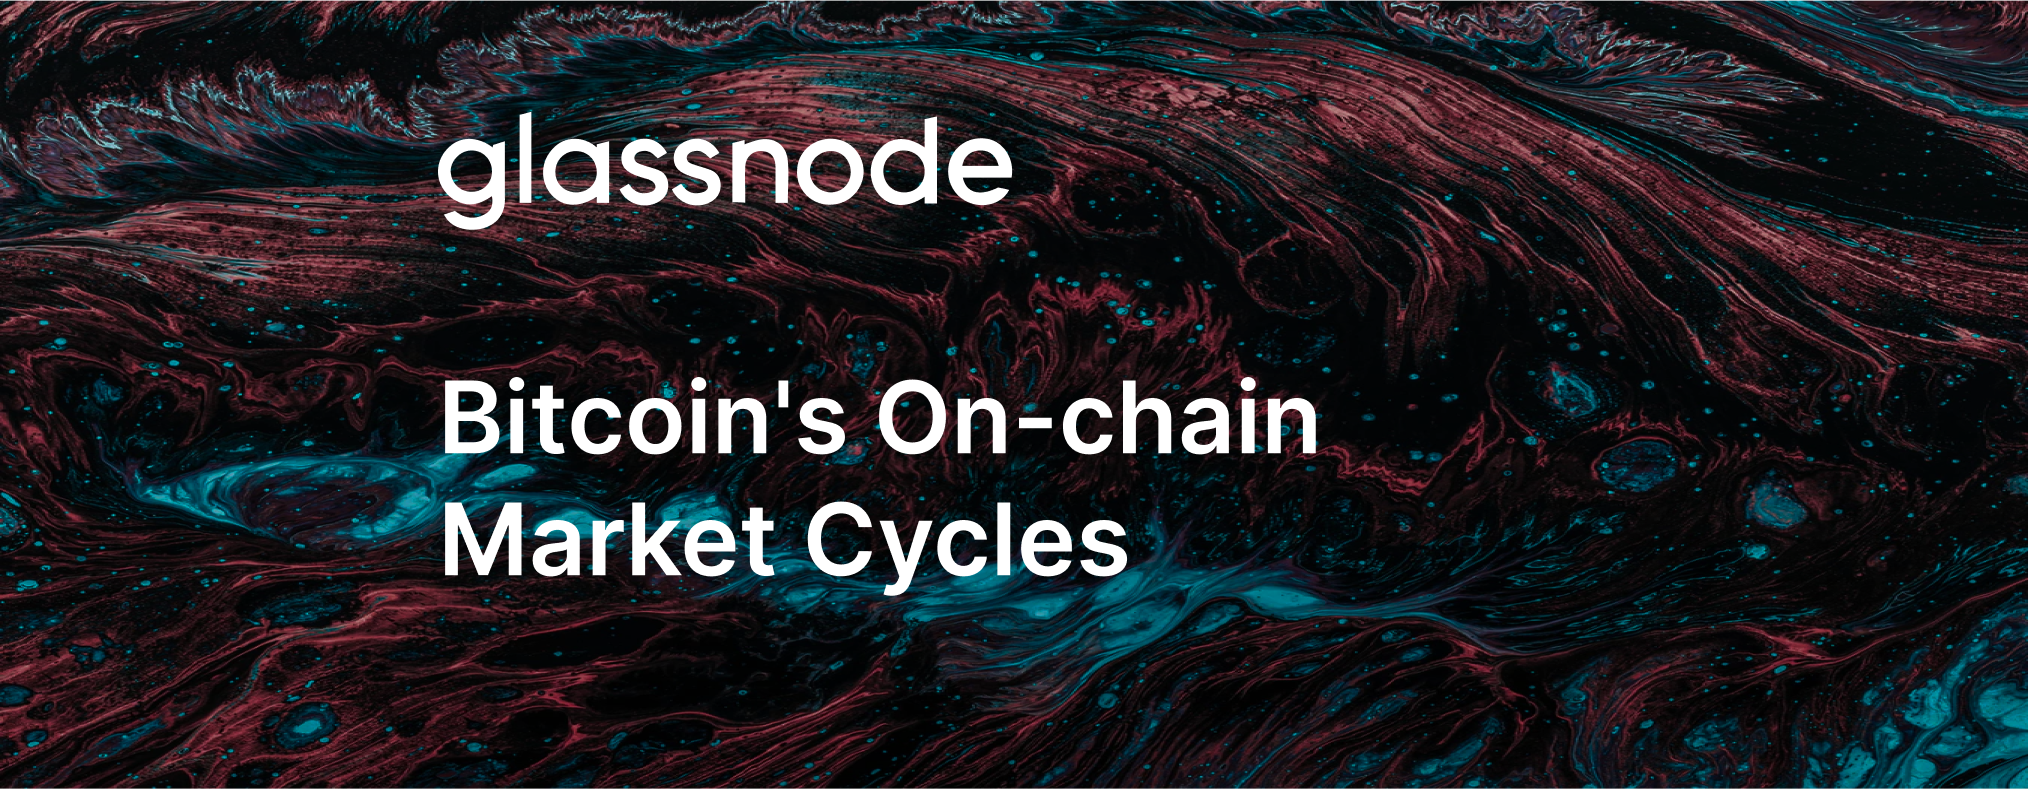 Bitcoin's On-chain Market Cycles